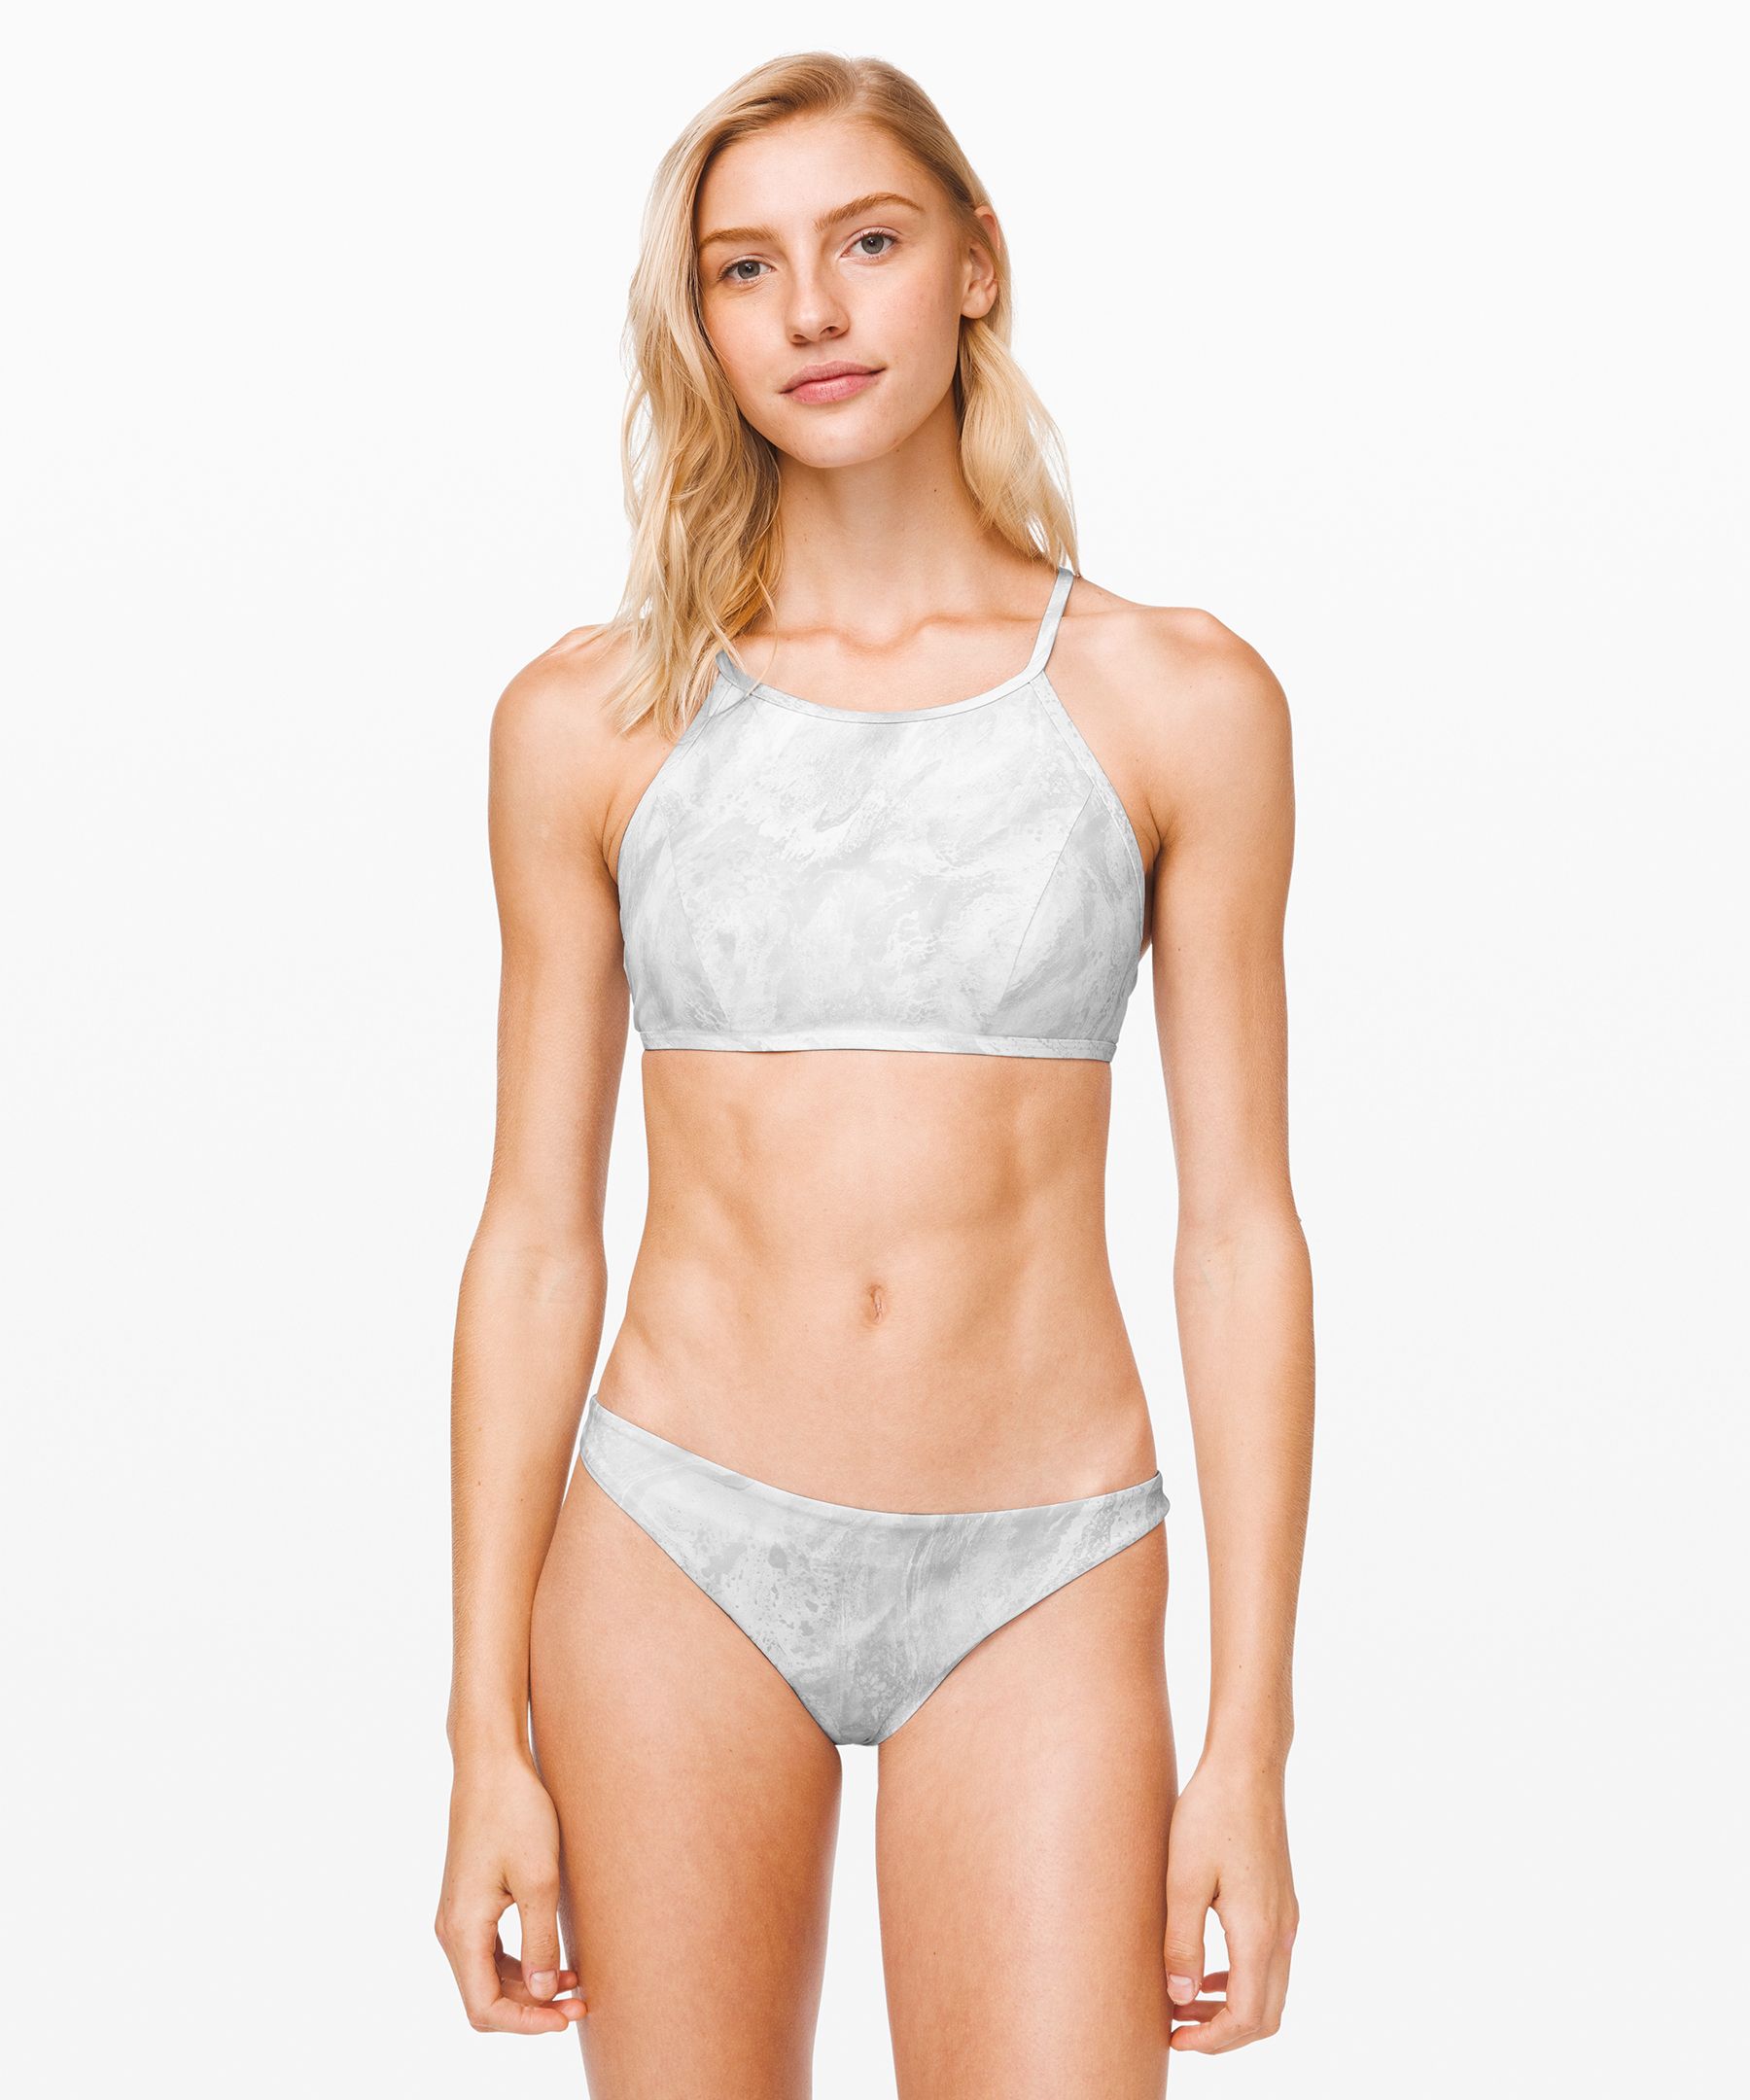 Lululemon See The Sea Swim Top*c/d Cup In Cosmic Shift White Grey